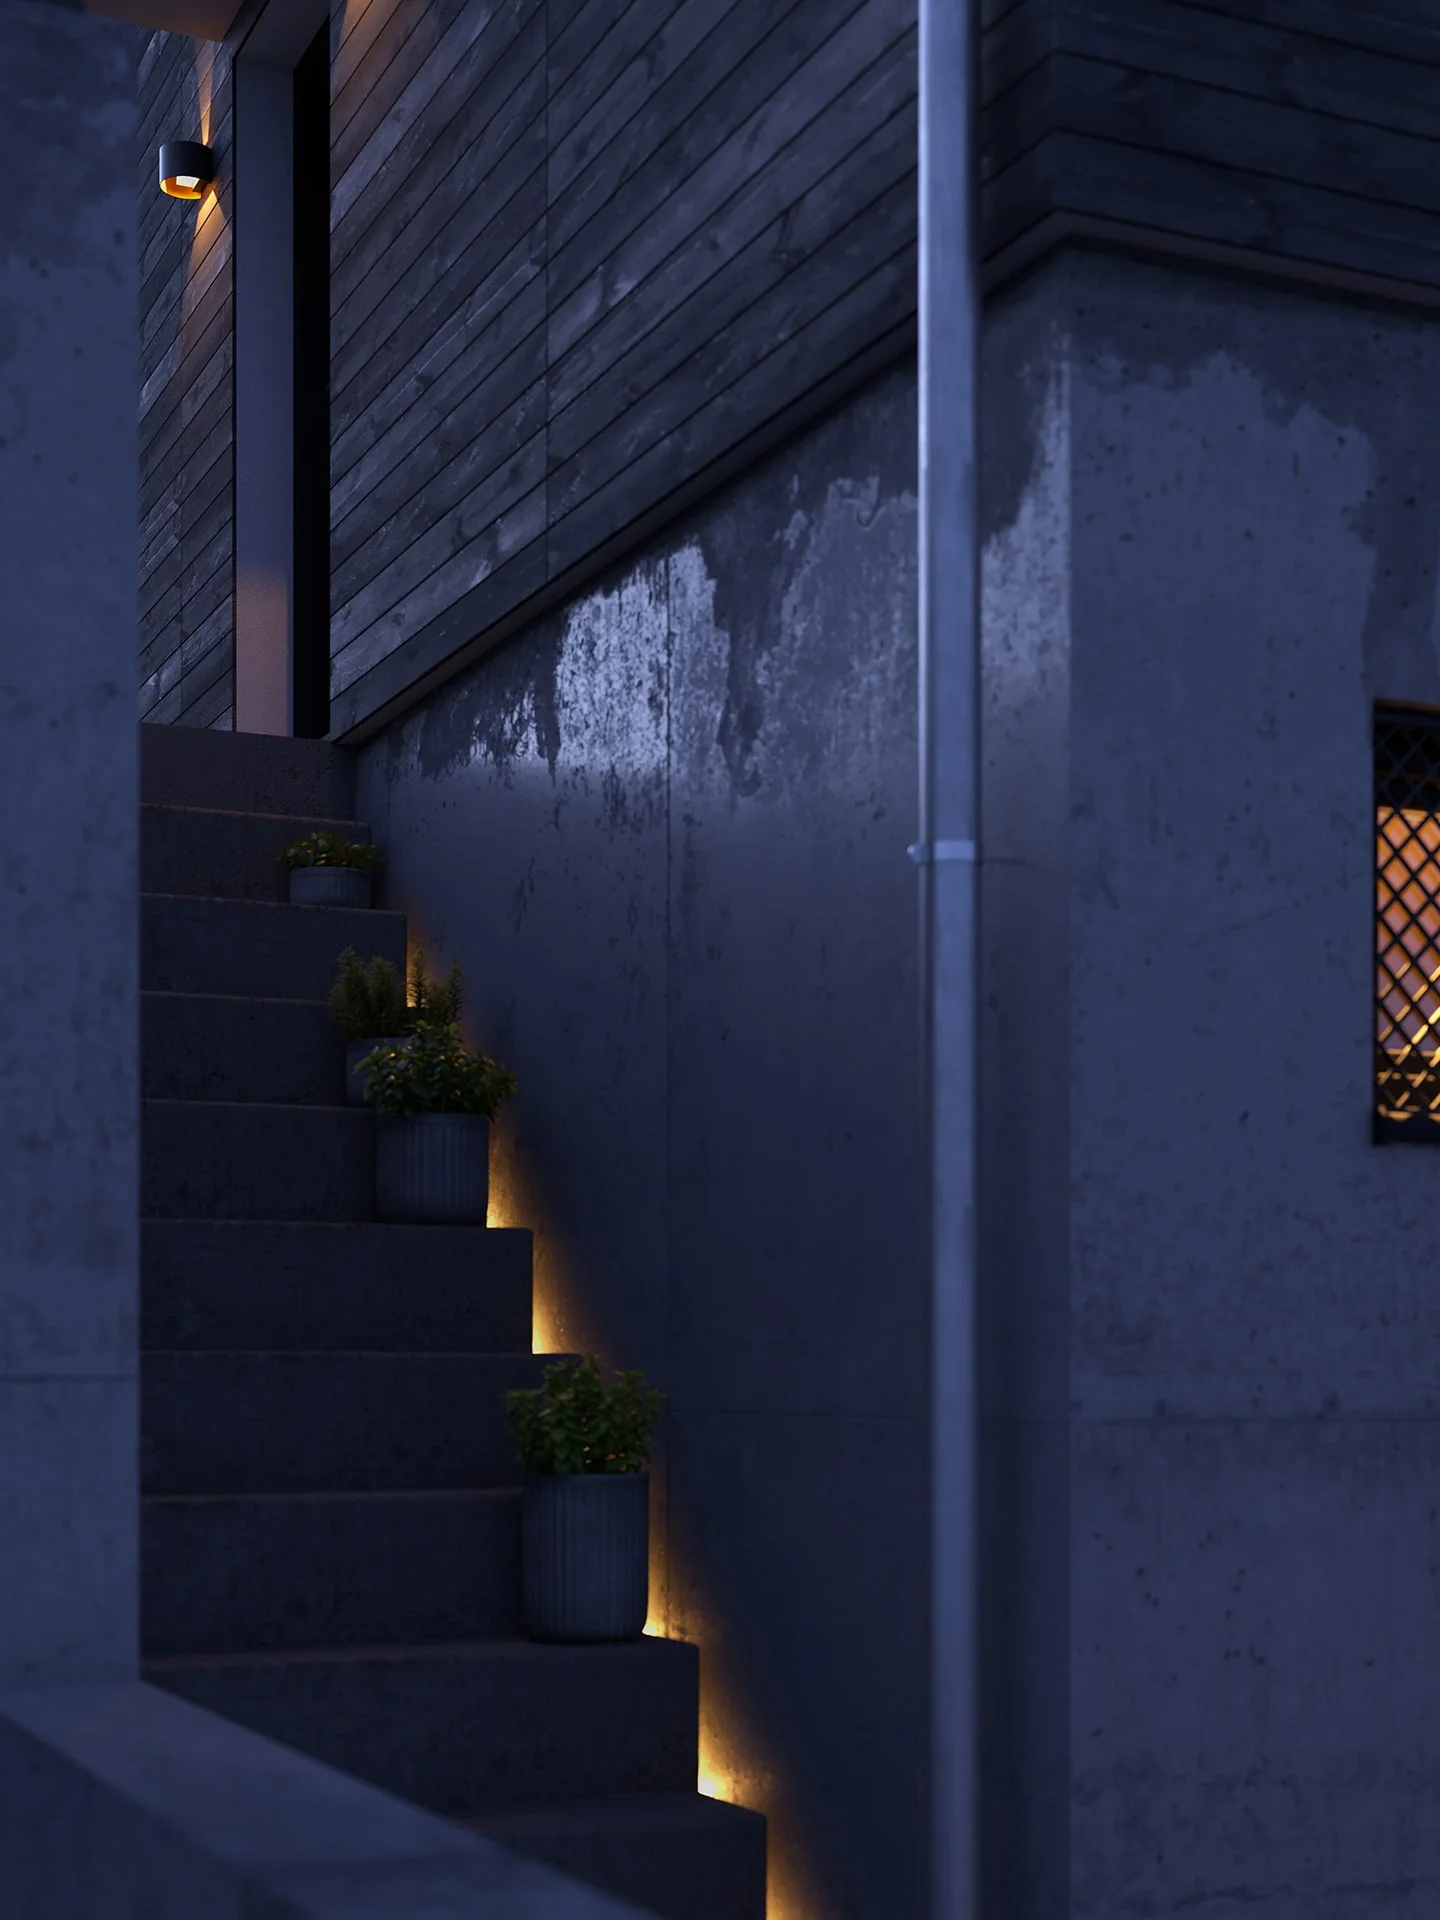 Architectural visualization. Single-family houses. Night view